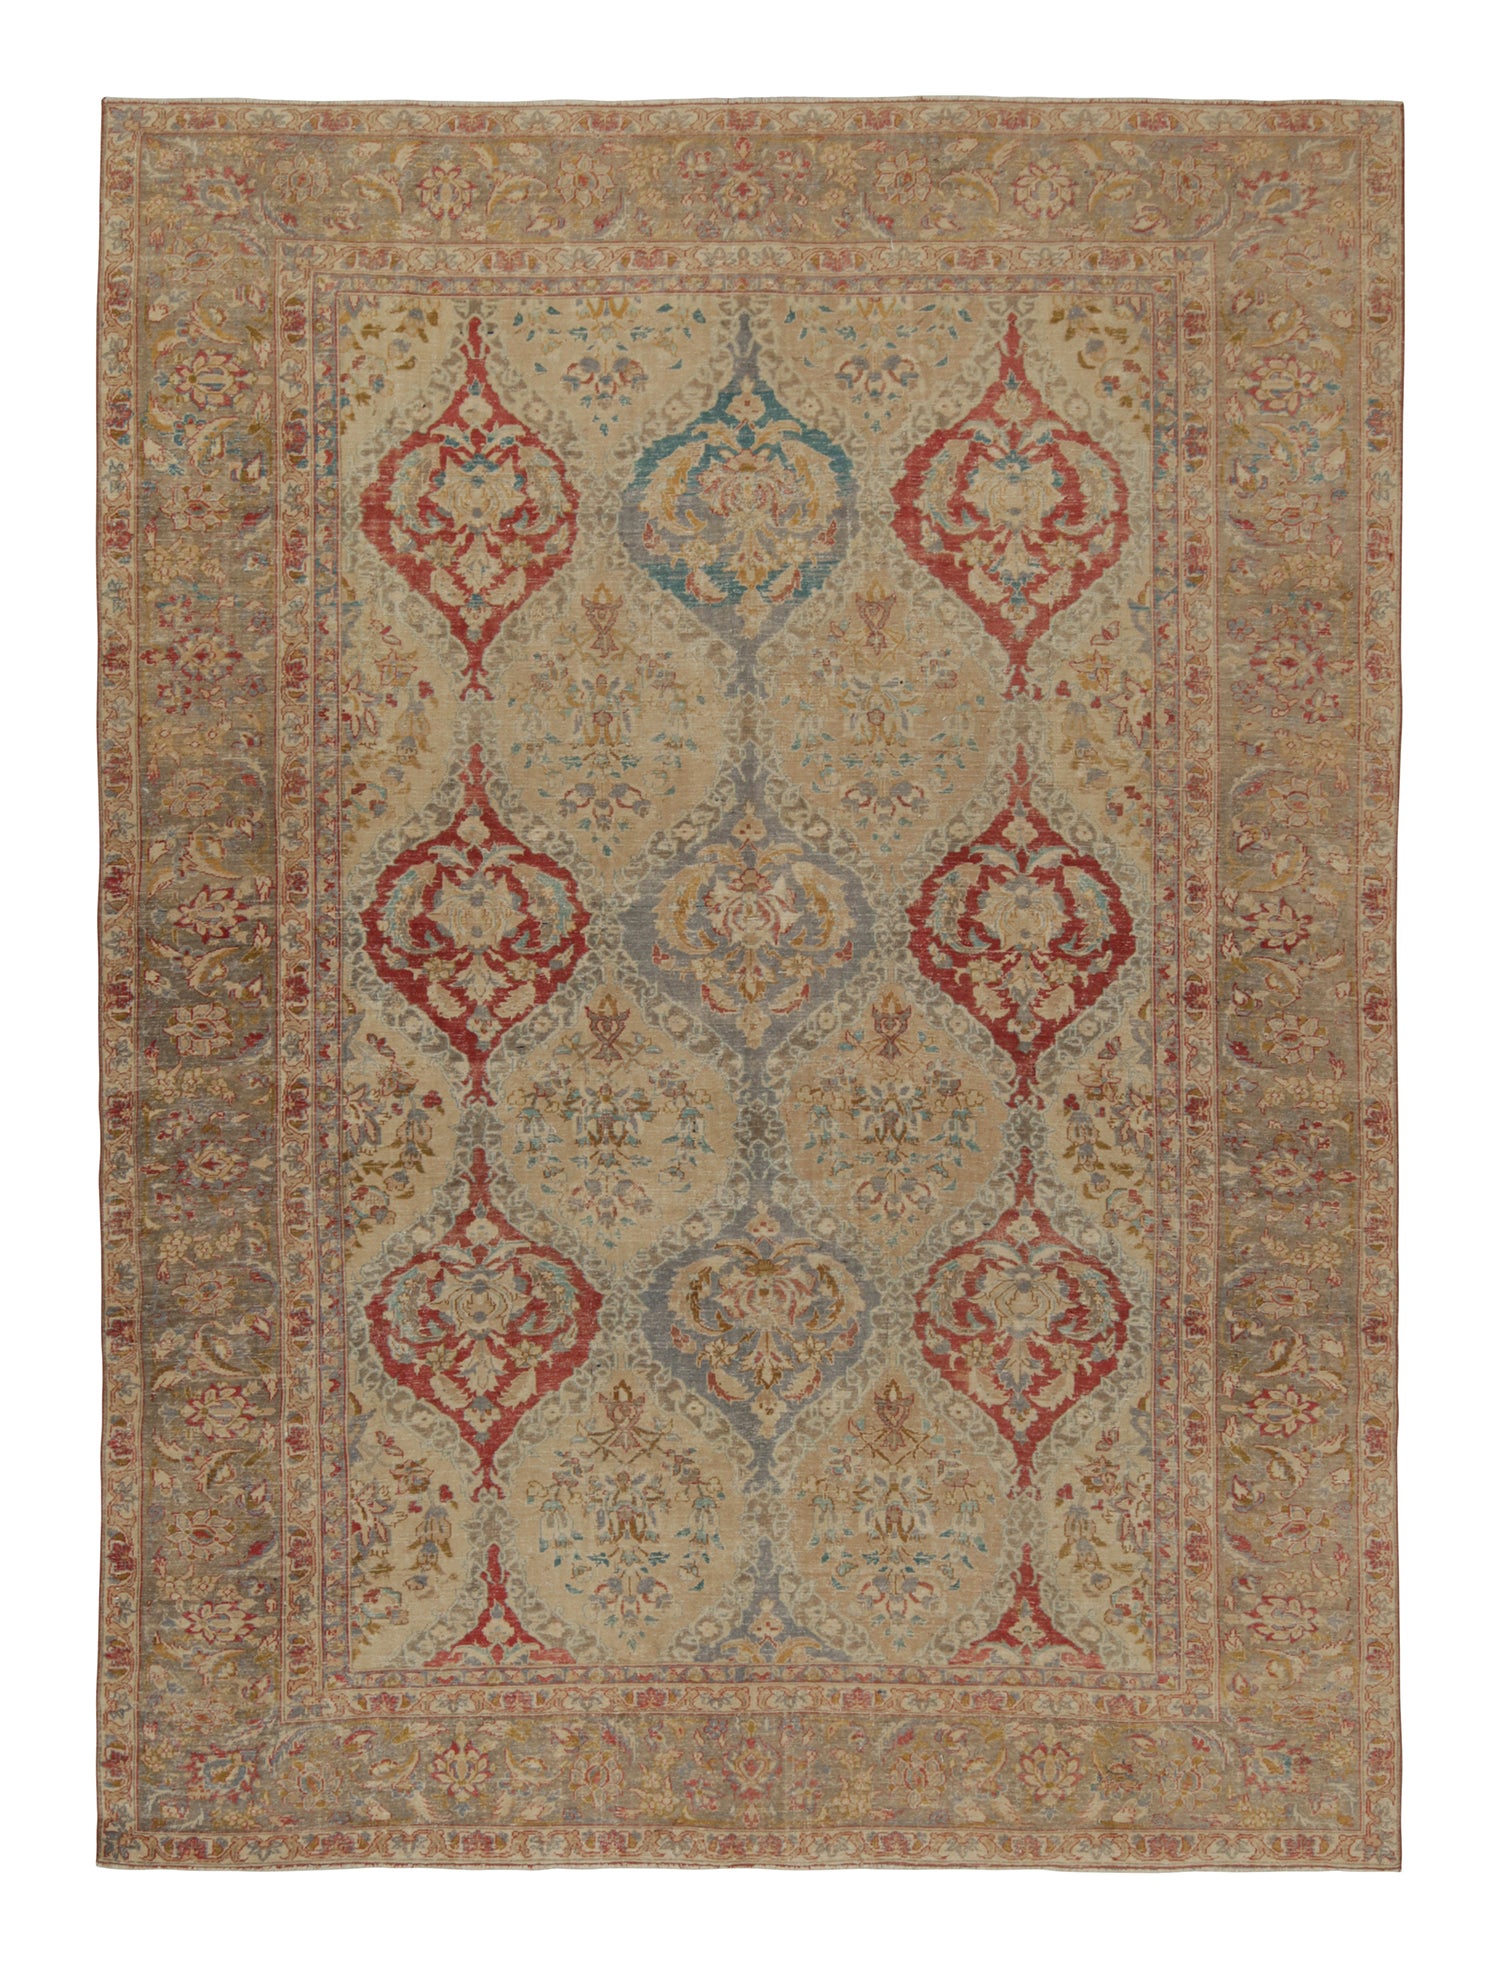 Antique Persian Tabriz Rug in Beige with Red and Floral Pattern by Rug & Kilim